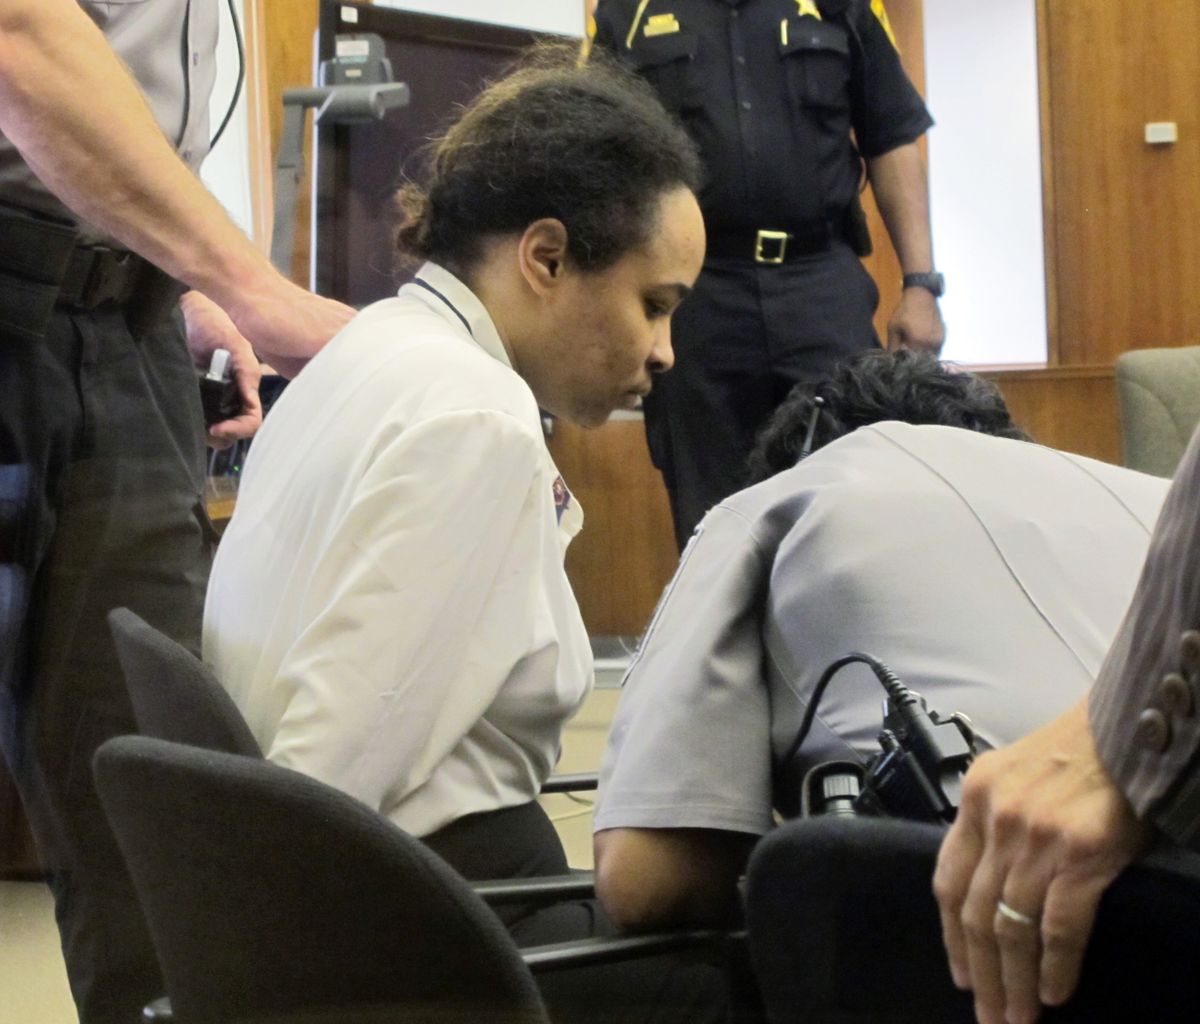 Annette Morales-Rodriguez waits for a deputy to release her leg chains in a Milwaukee court for the start of her trial on Monday, Sept. 17, 2012. She